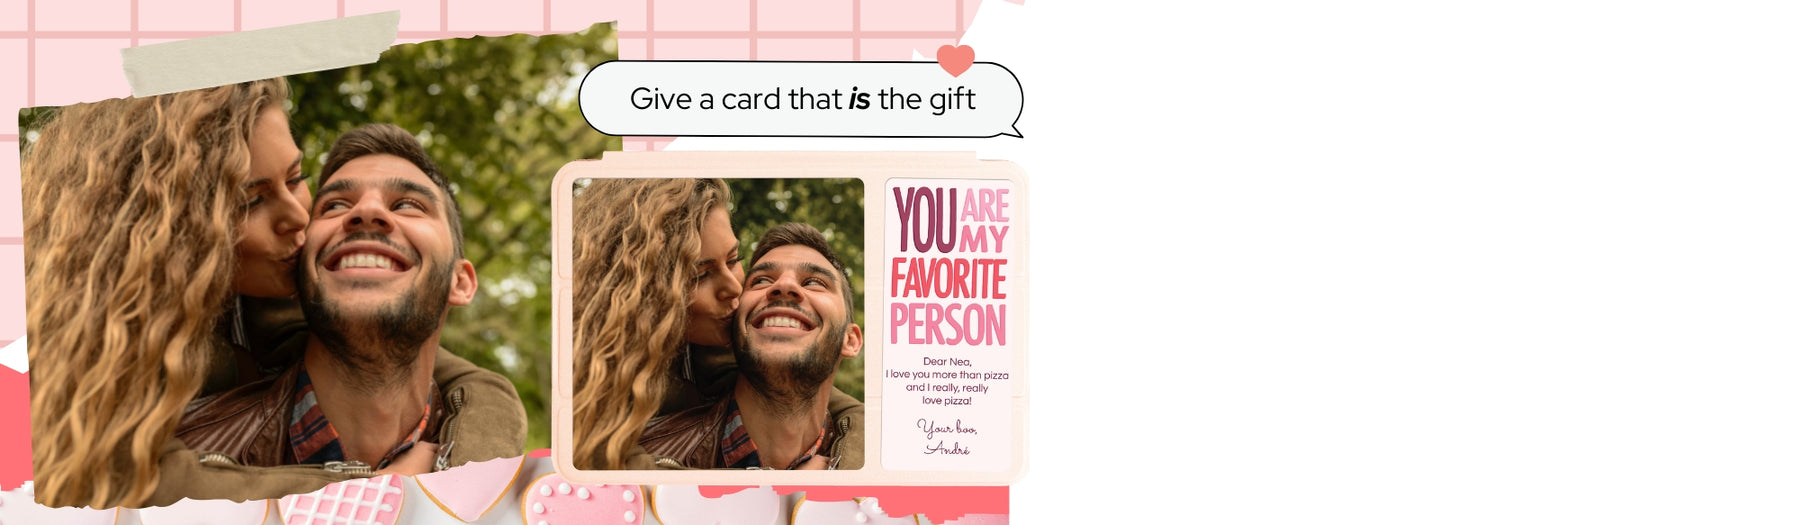 Valentine's Day Cards - Sticker Greeting Cards